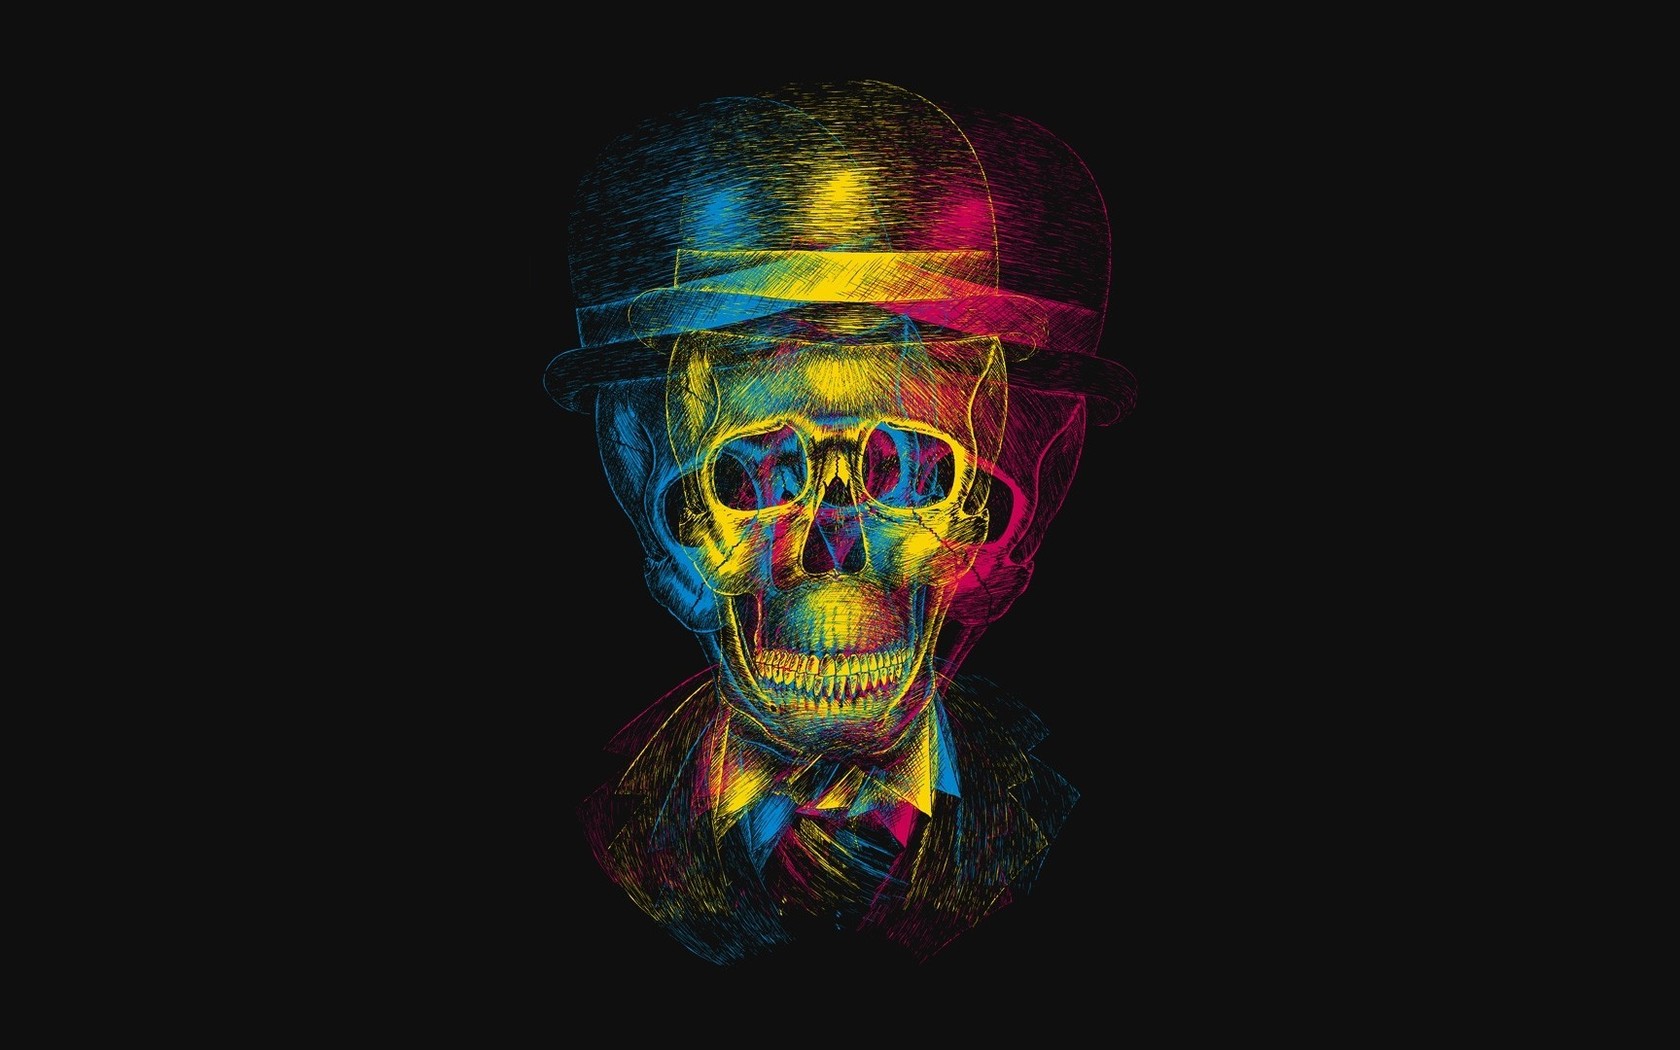 Skull In Hat Wallpaper And Image Pictures Photos